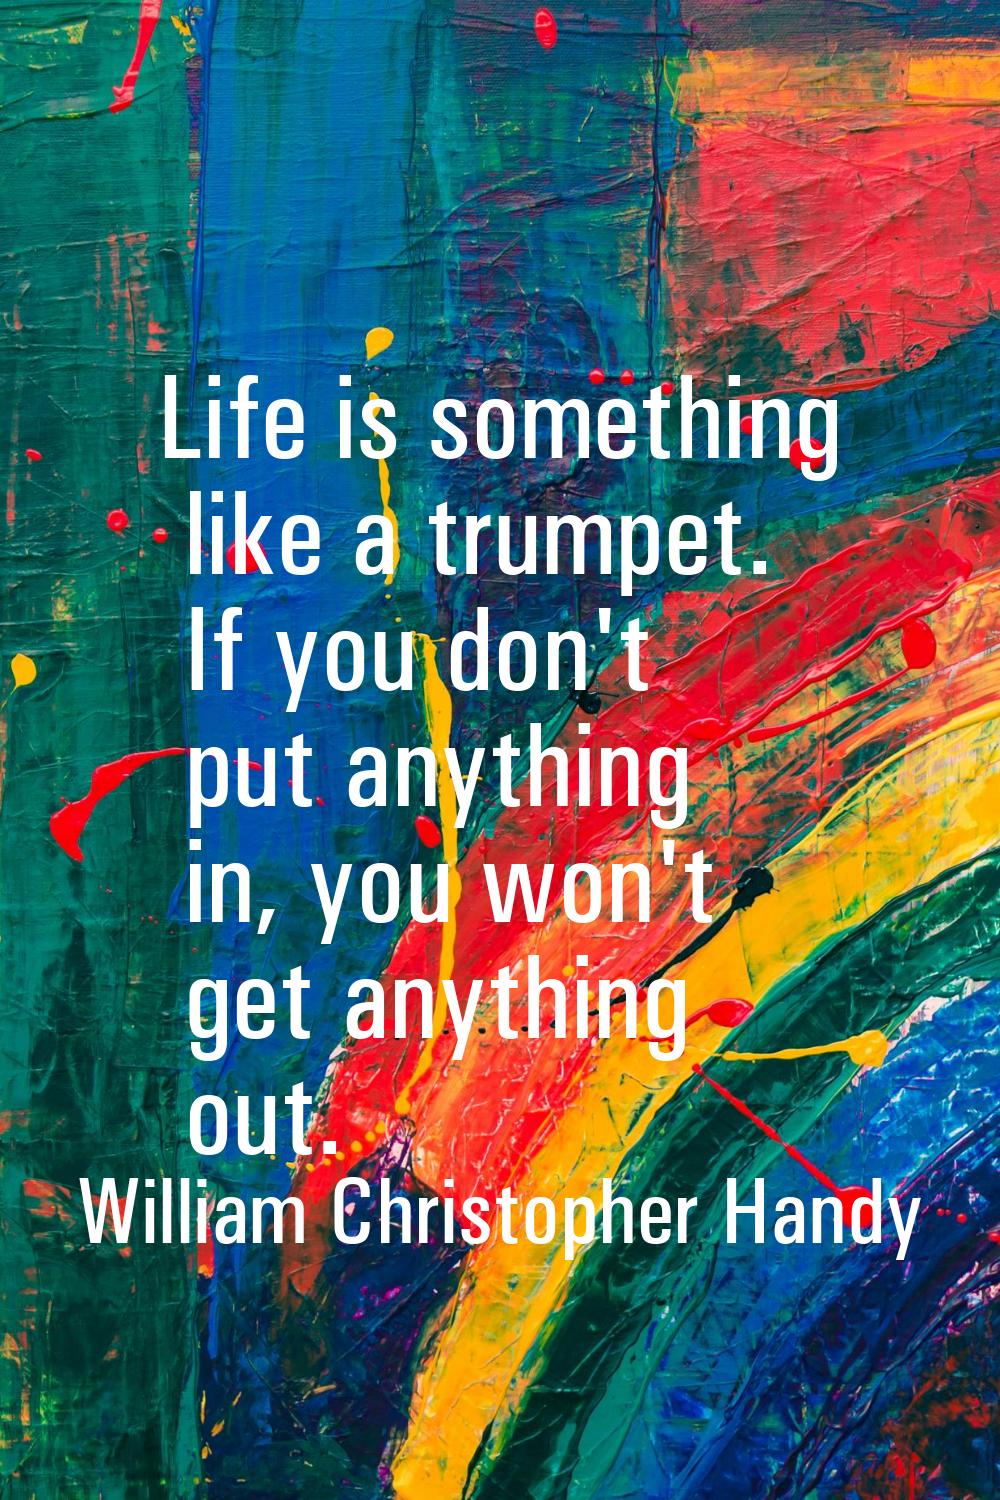 Life is something like a trumpet. If you don't put anything in, you won't get anything out.